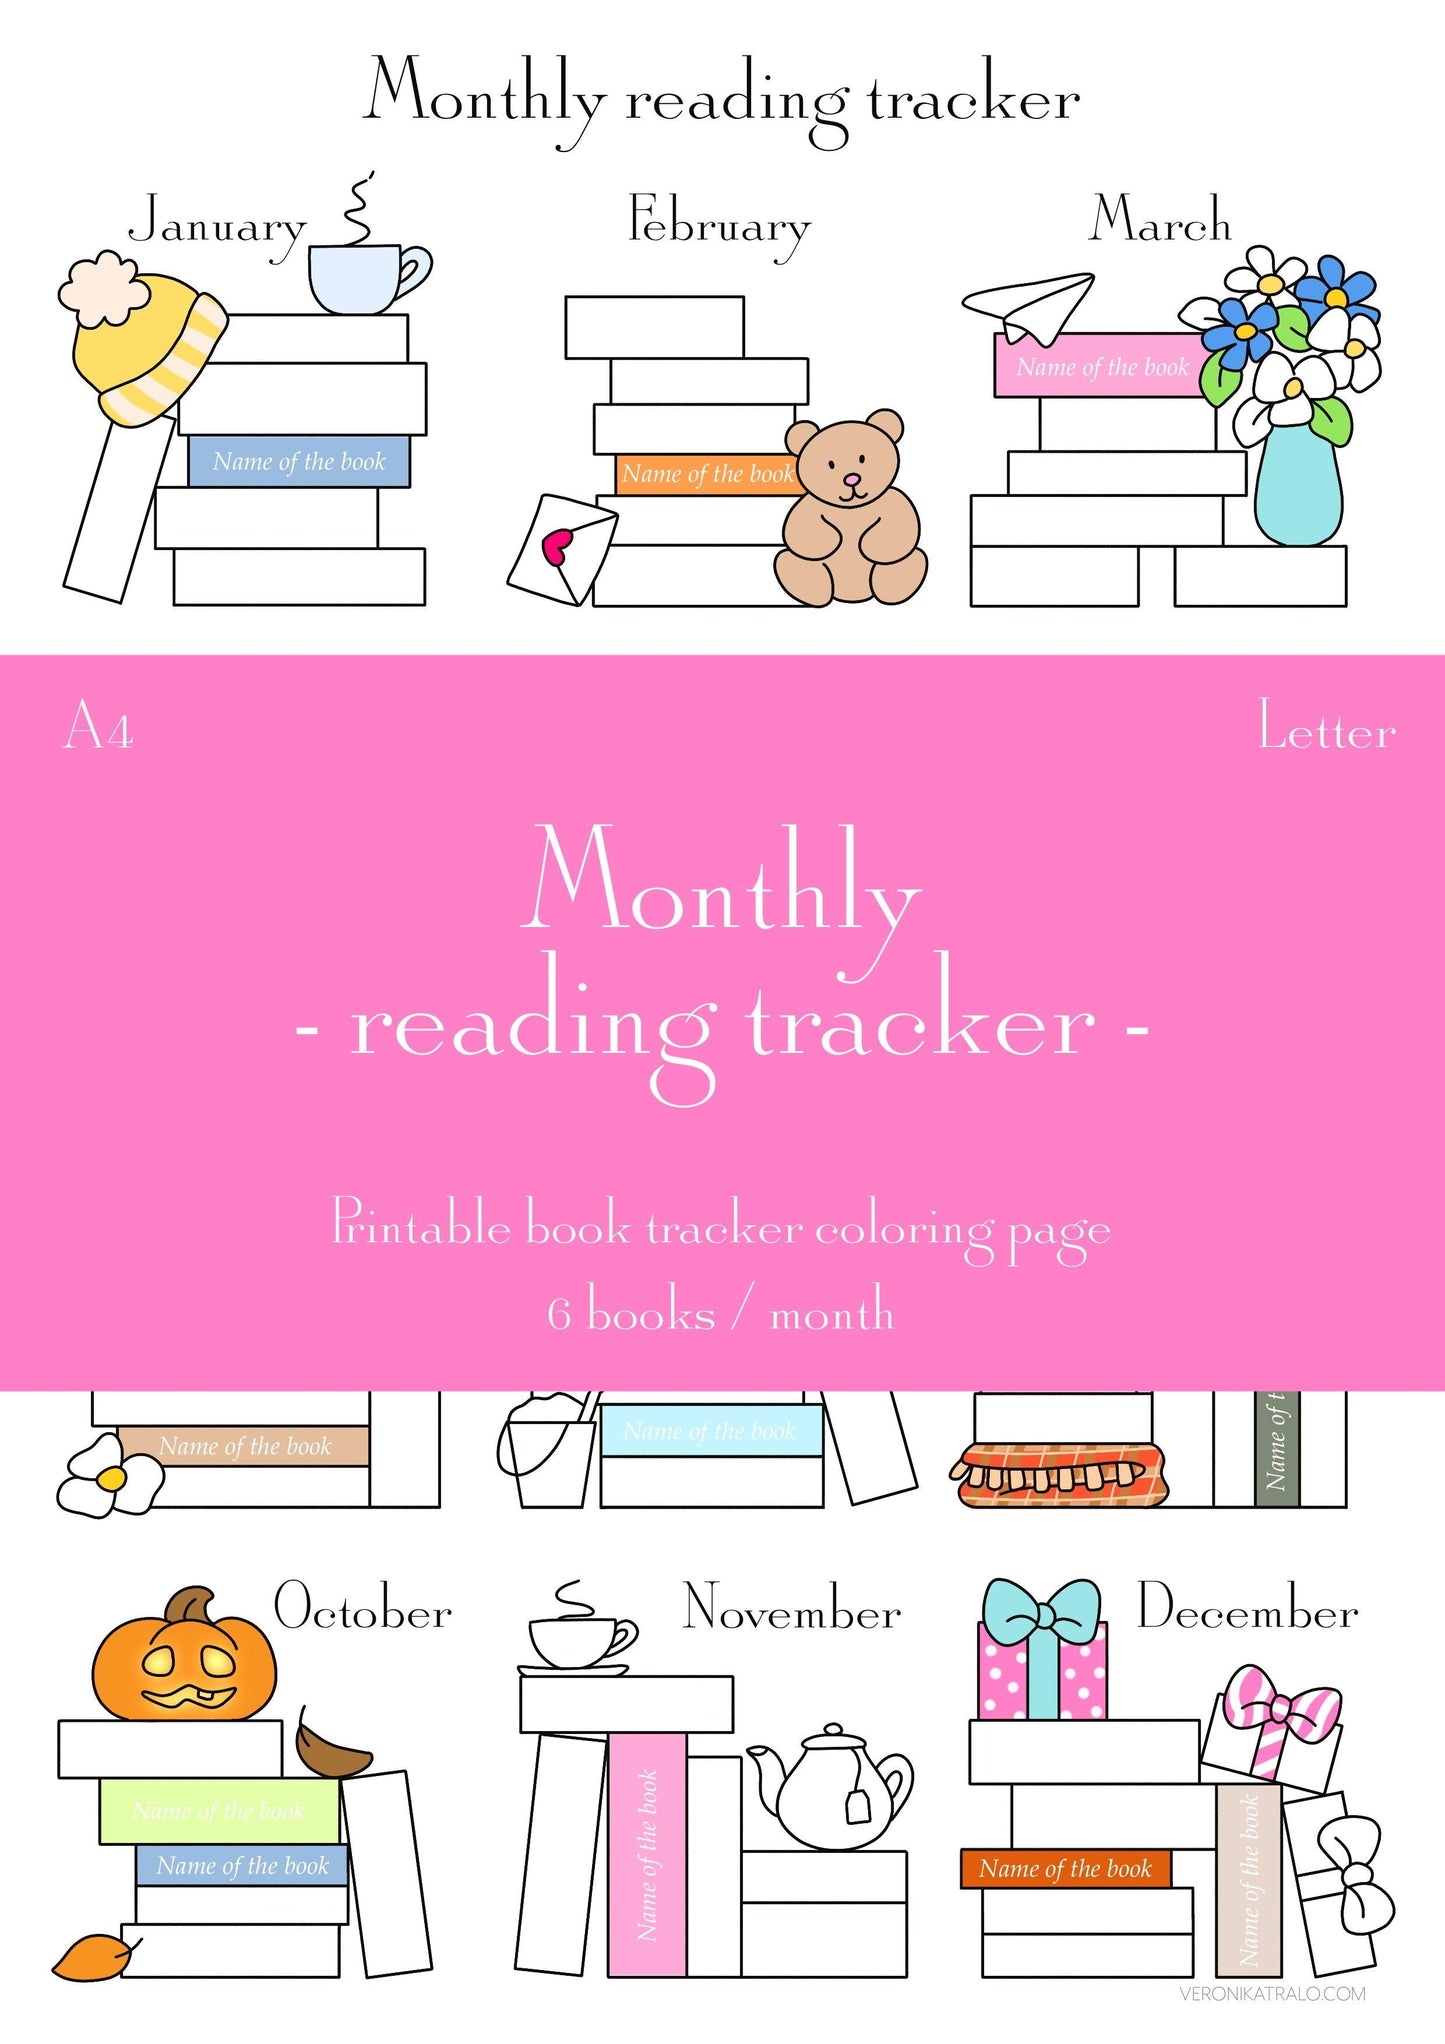 6 books/month • Monthly reading tracker | Printable book tracker coloring page • A4 + LETTER - amigoscanarios